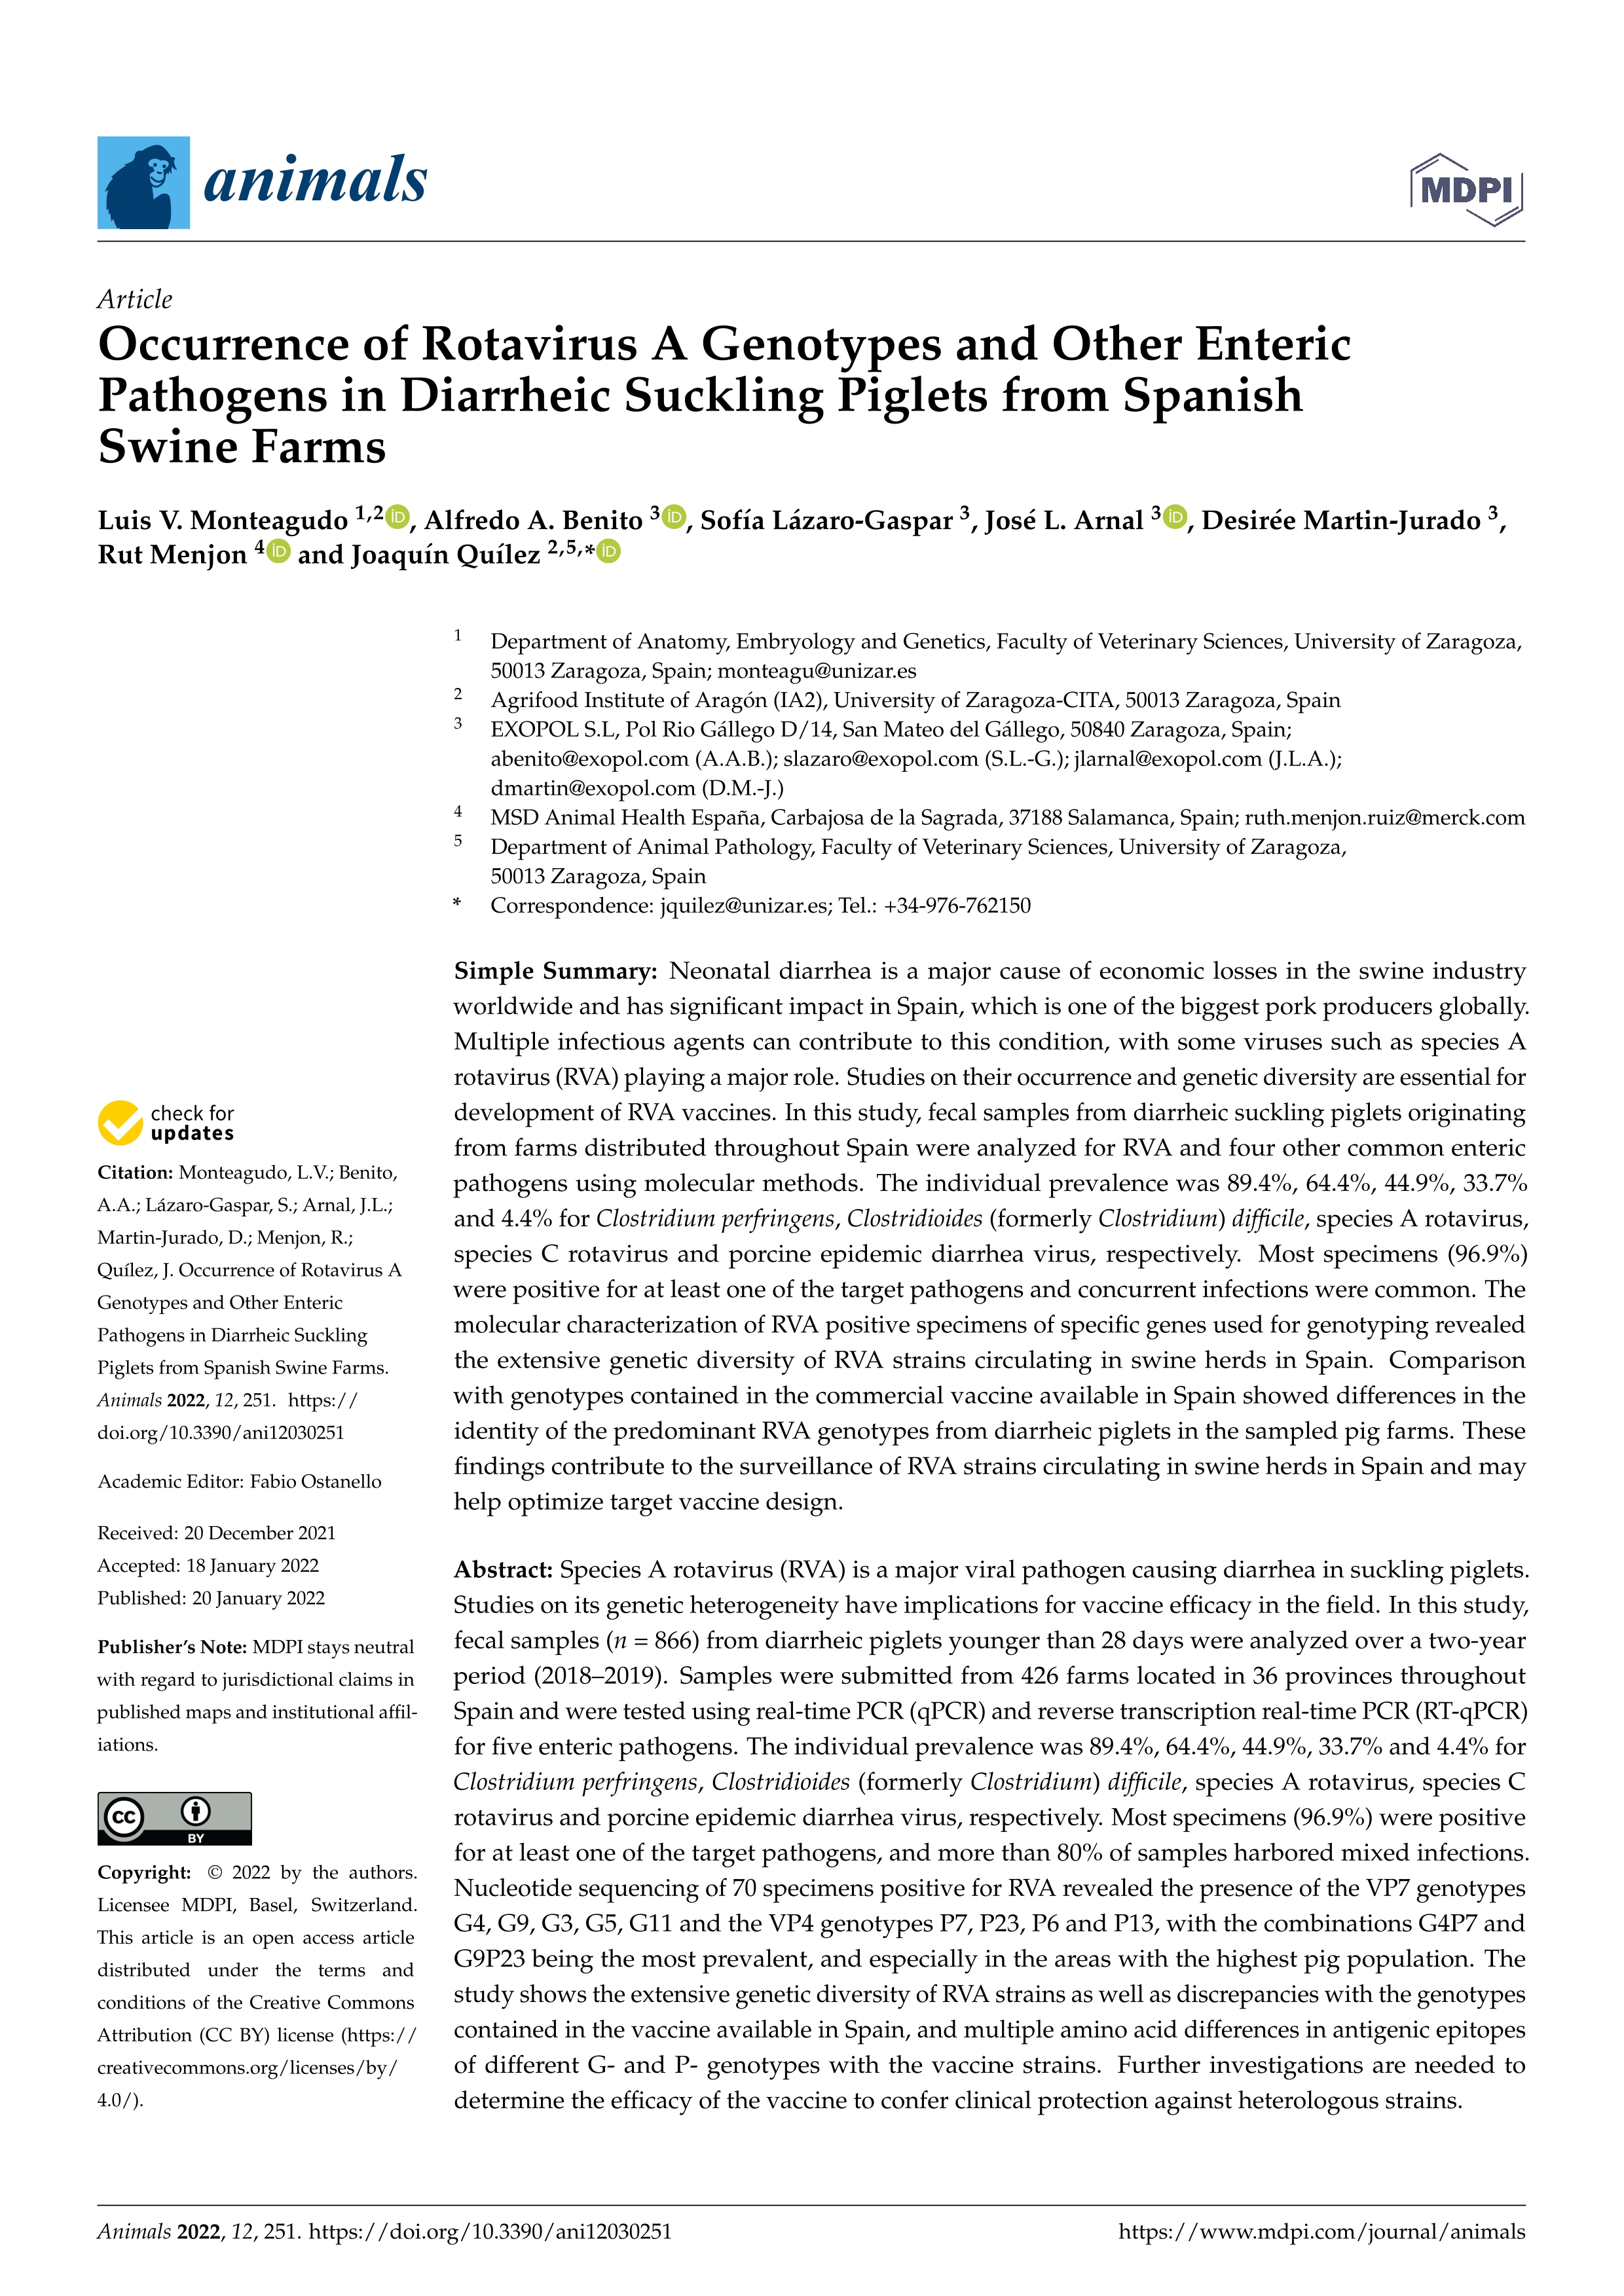 Occurrence of rotavirus a genotypes and other enteric pathogens in diarrheic suckling piglets from Spanish swine farms